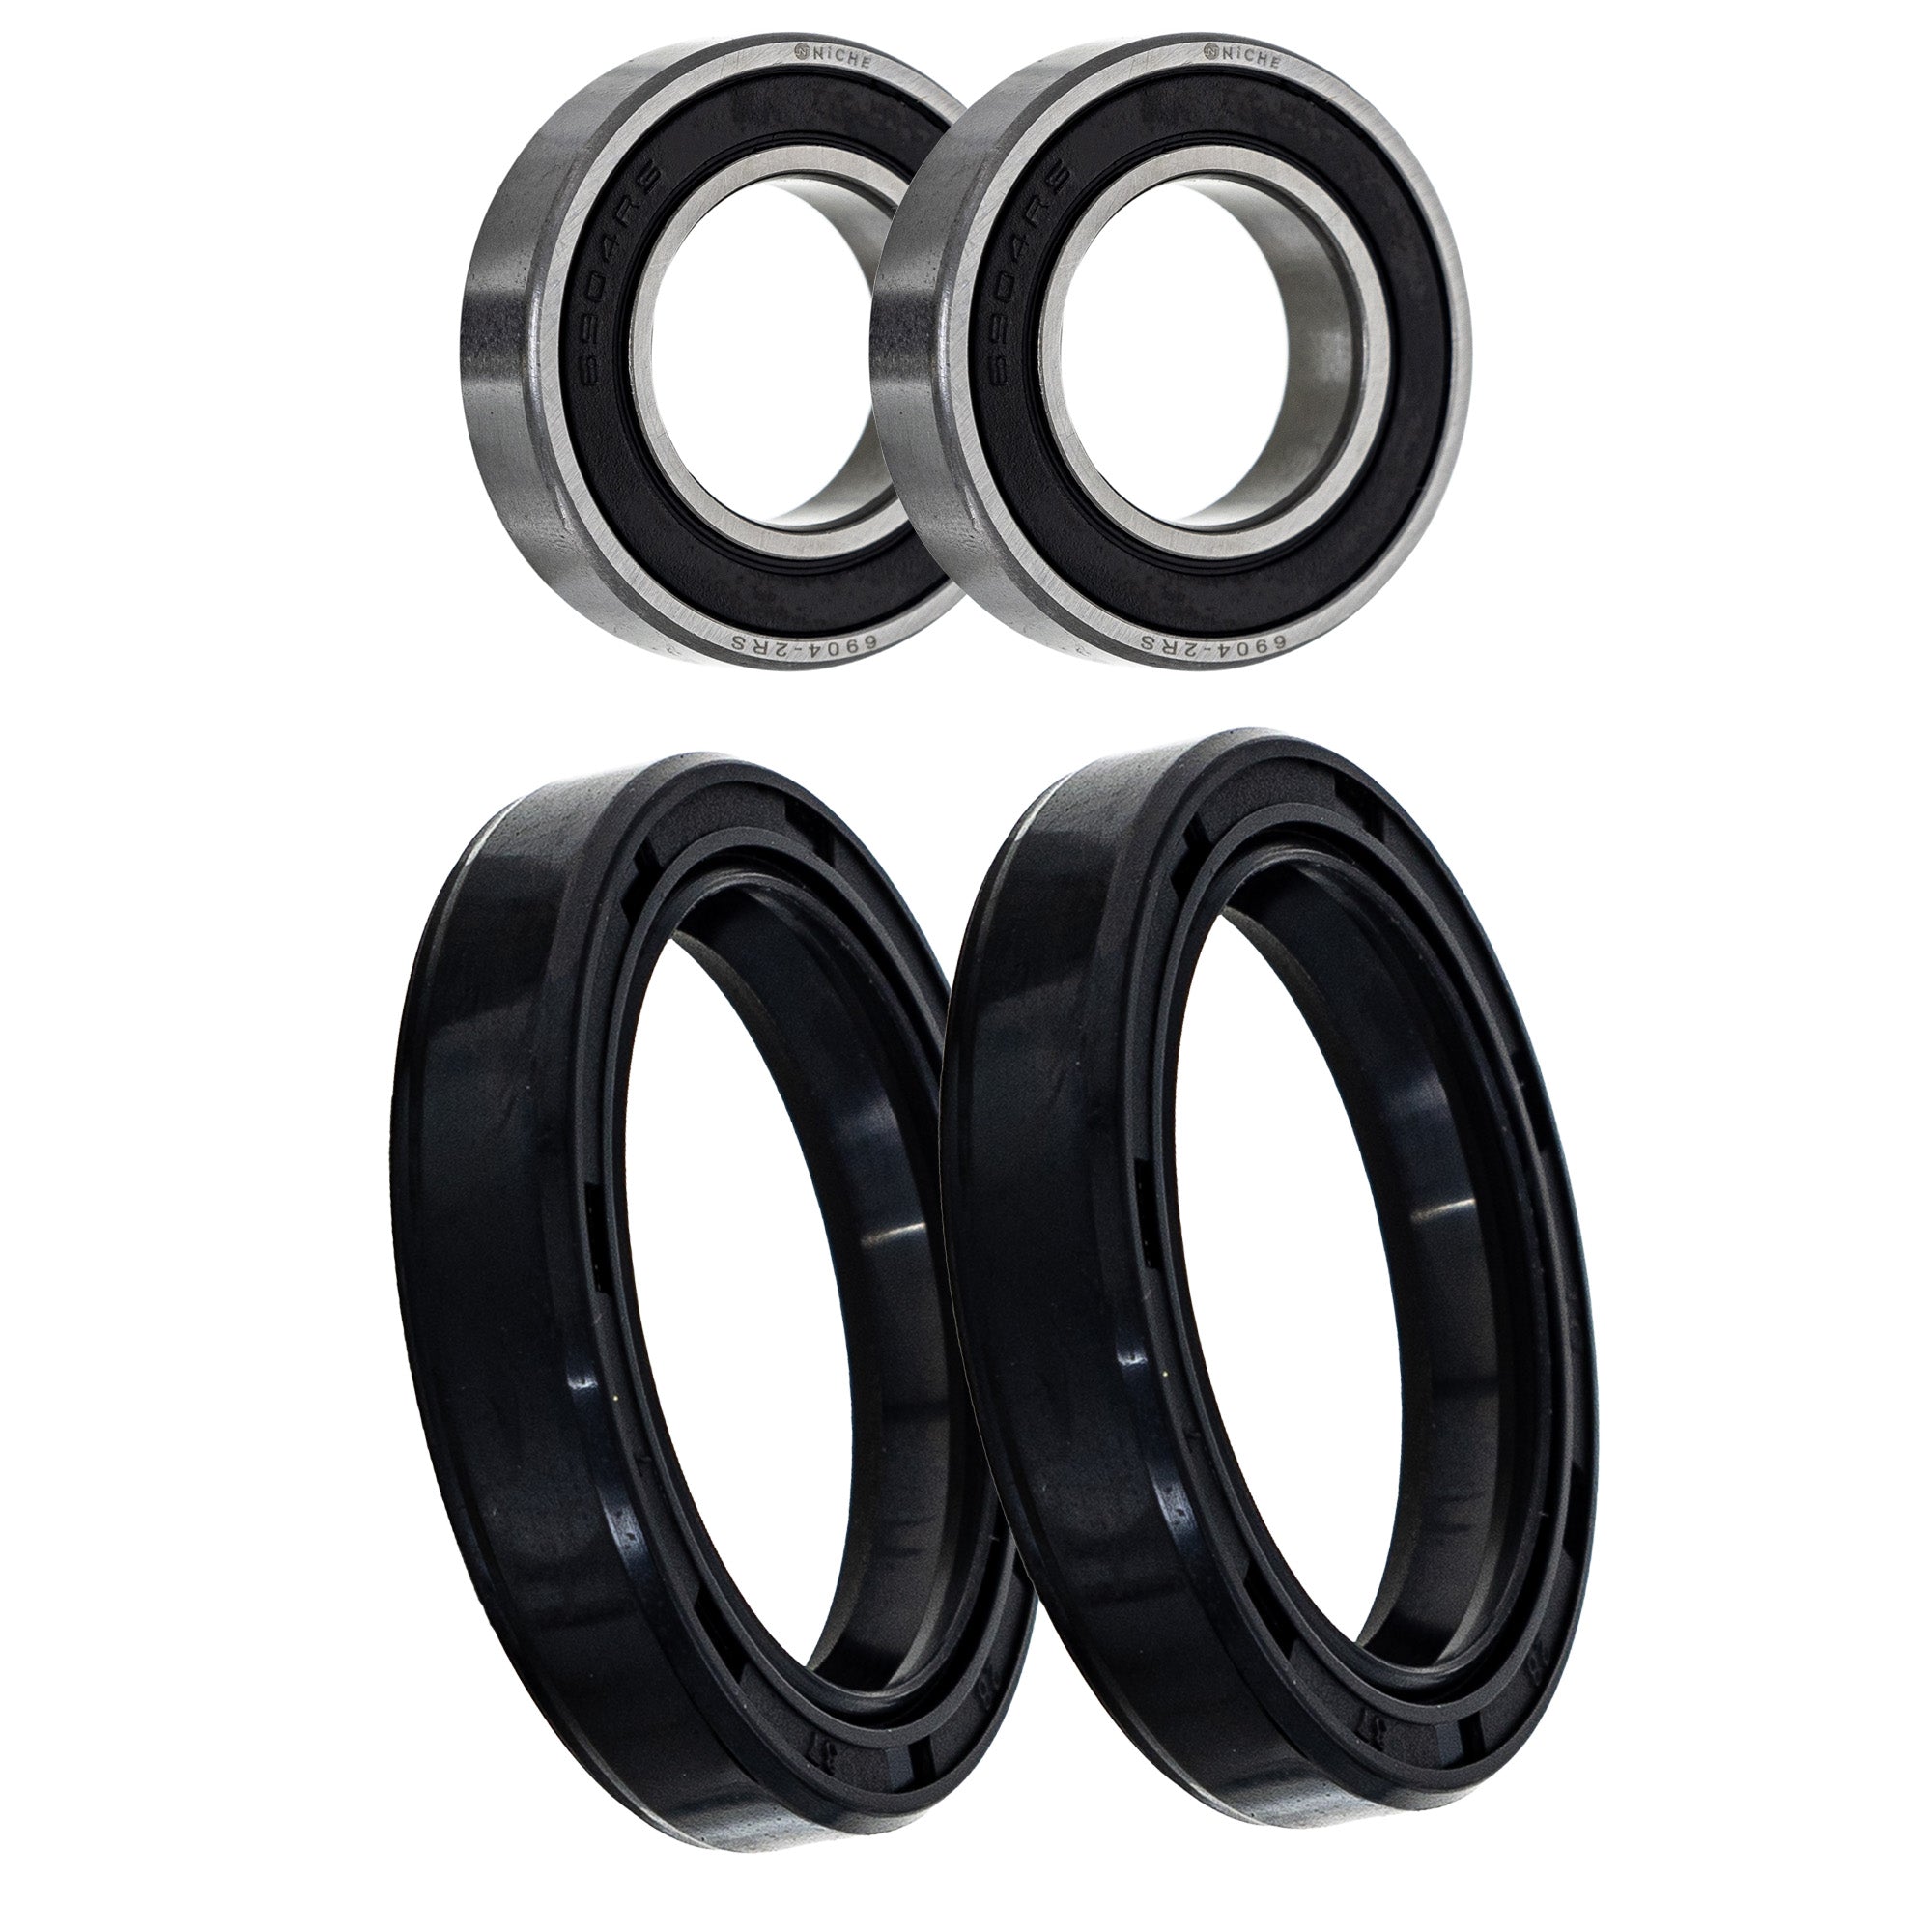 Wheel Bearing Seal Kit for zOTHER RM250 RM125 NICHE MK1009153